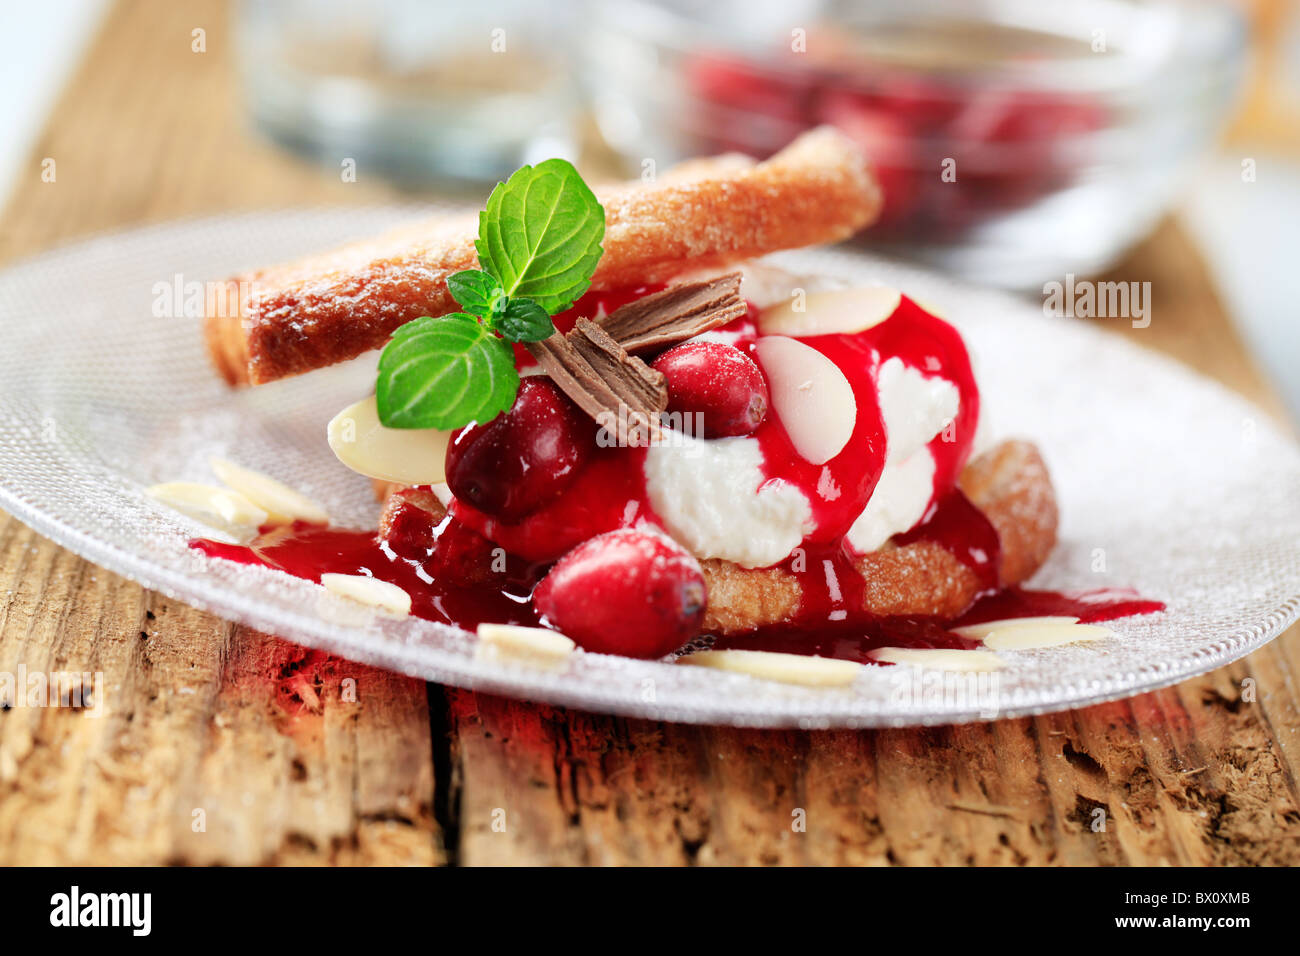 Dessert - Waffles with cream, cranberries and syrup Stock Photo